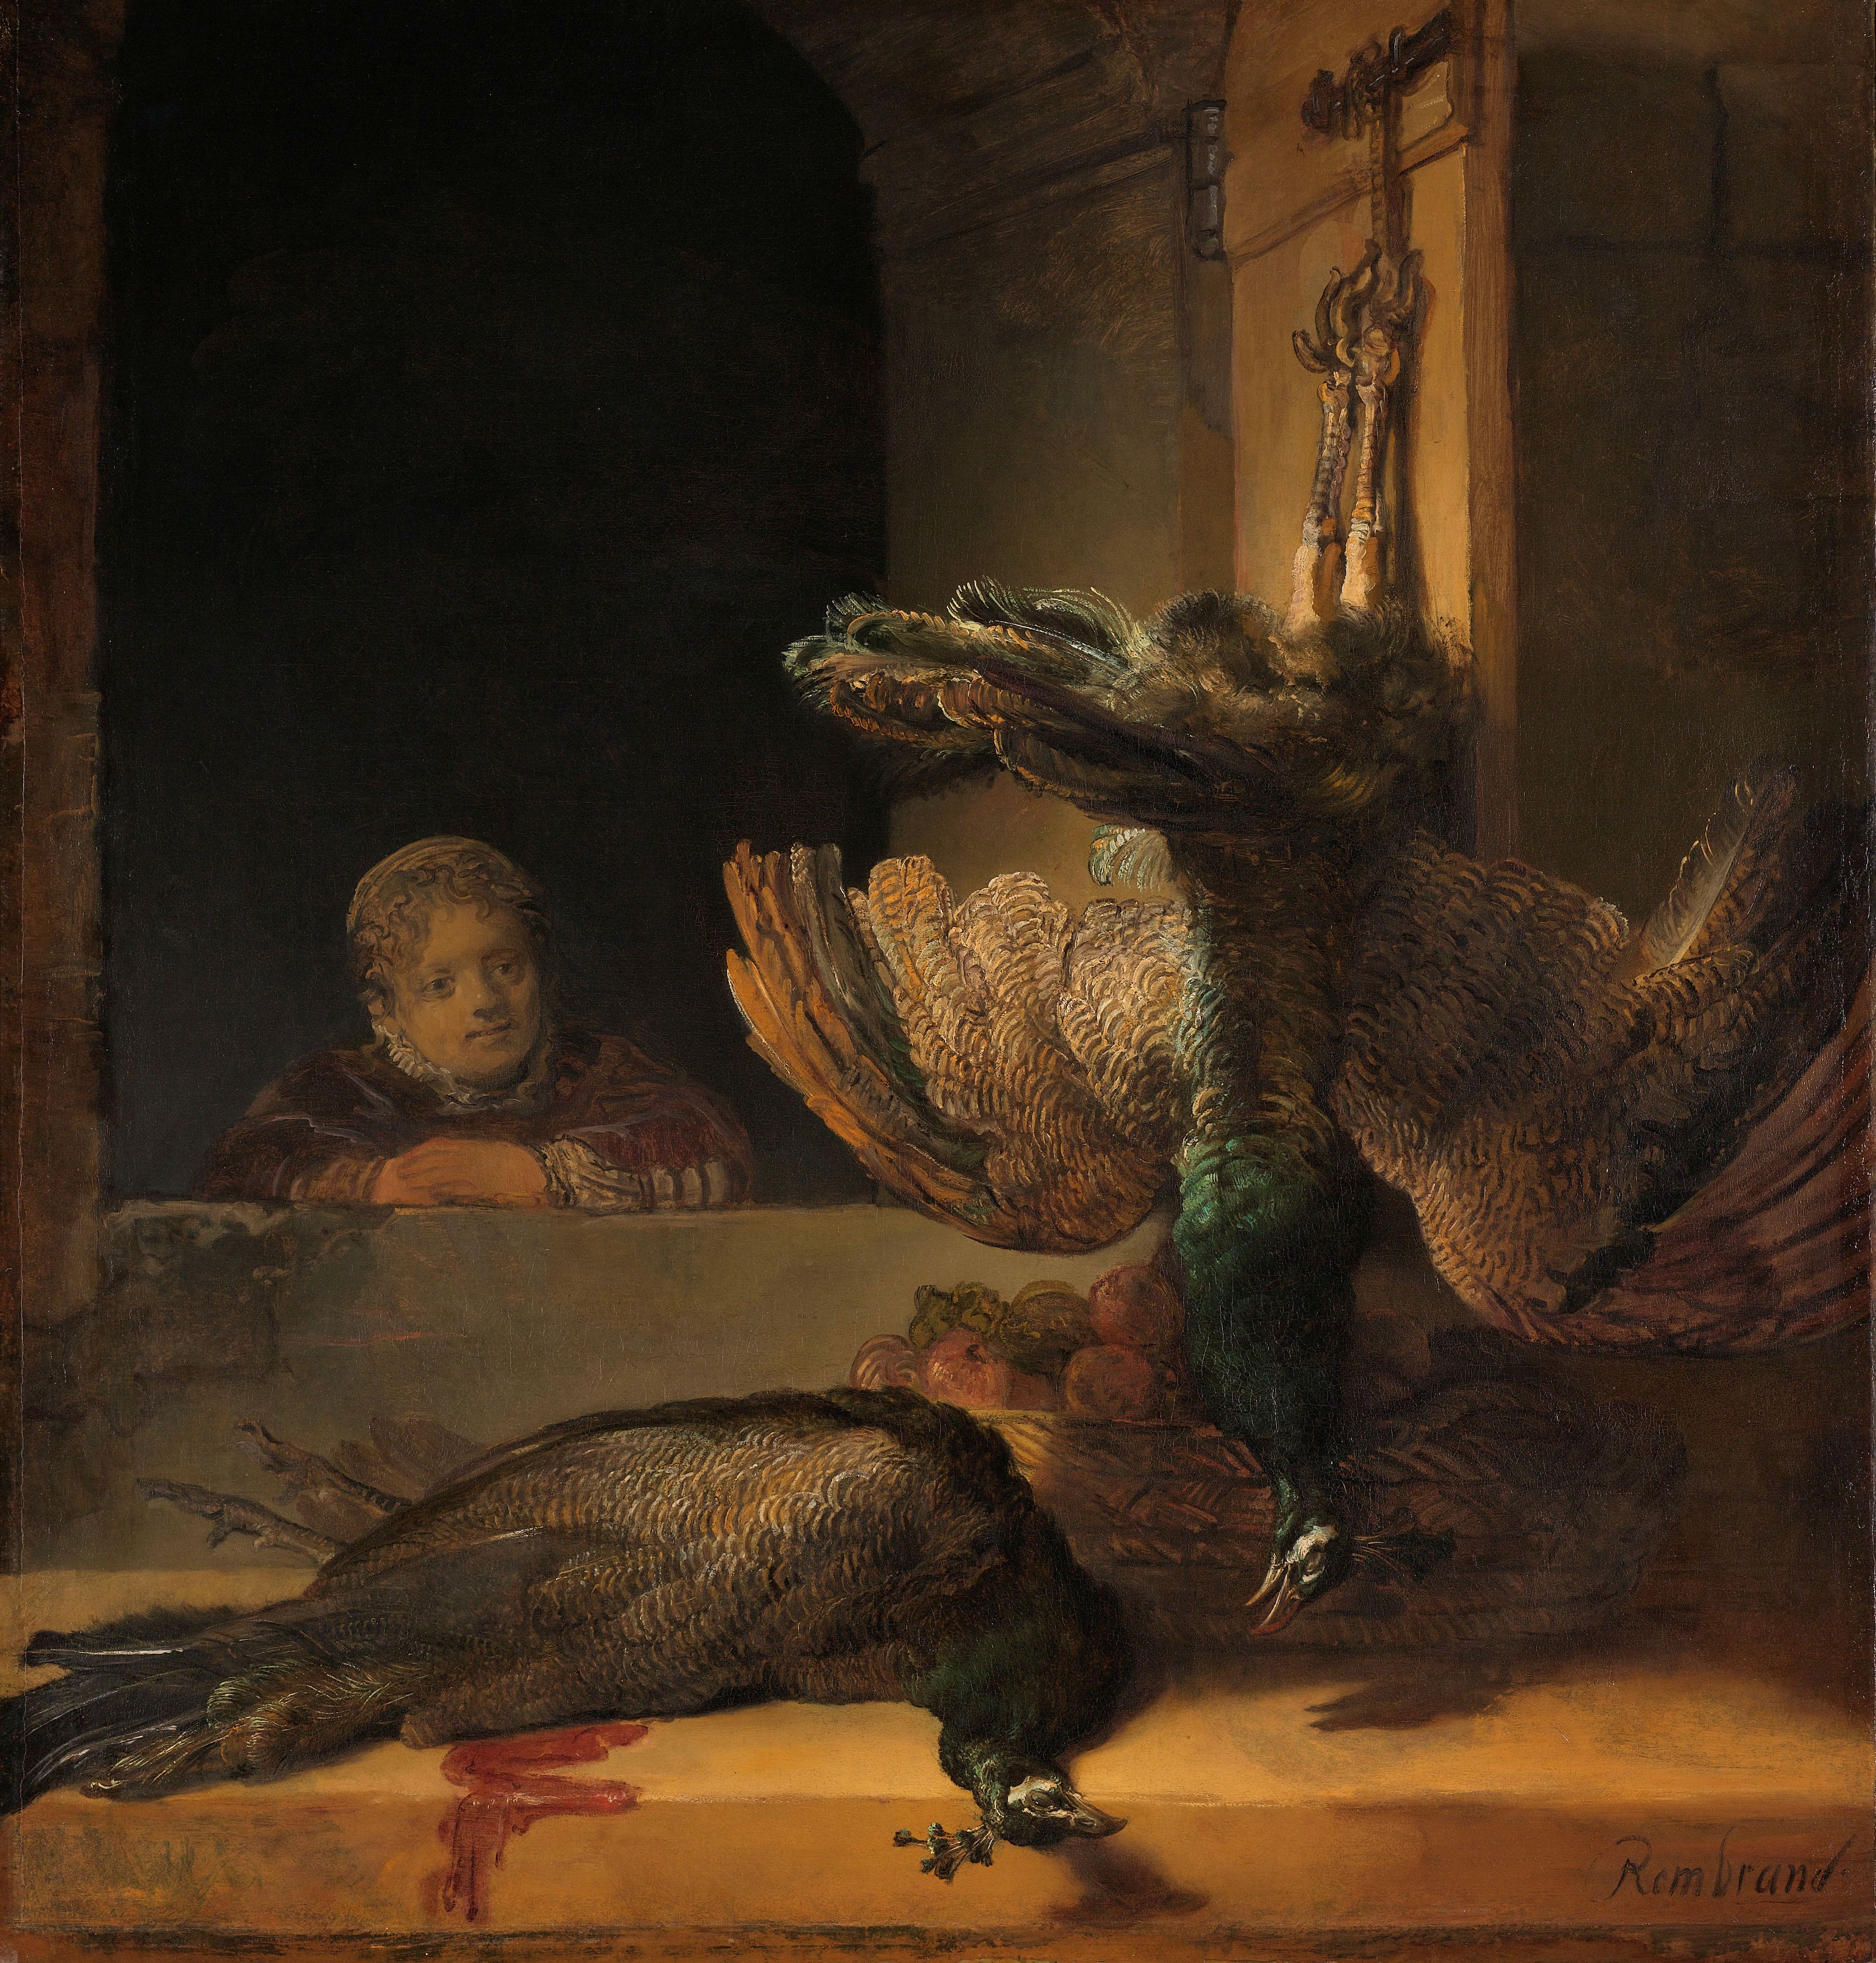 Rembrandt, "Still Life with Peacocks(1639)"